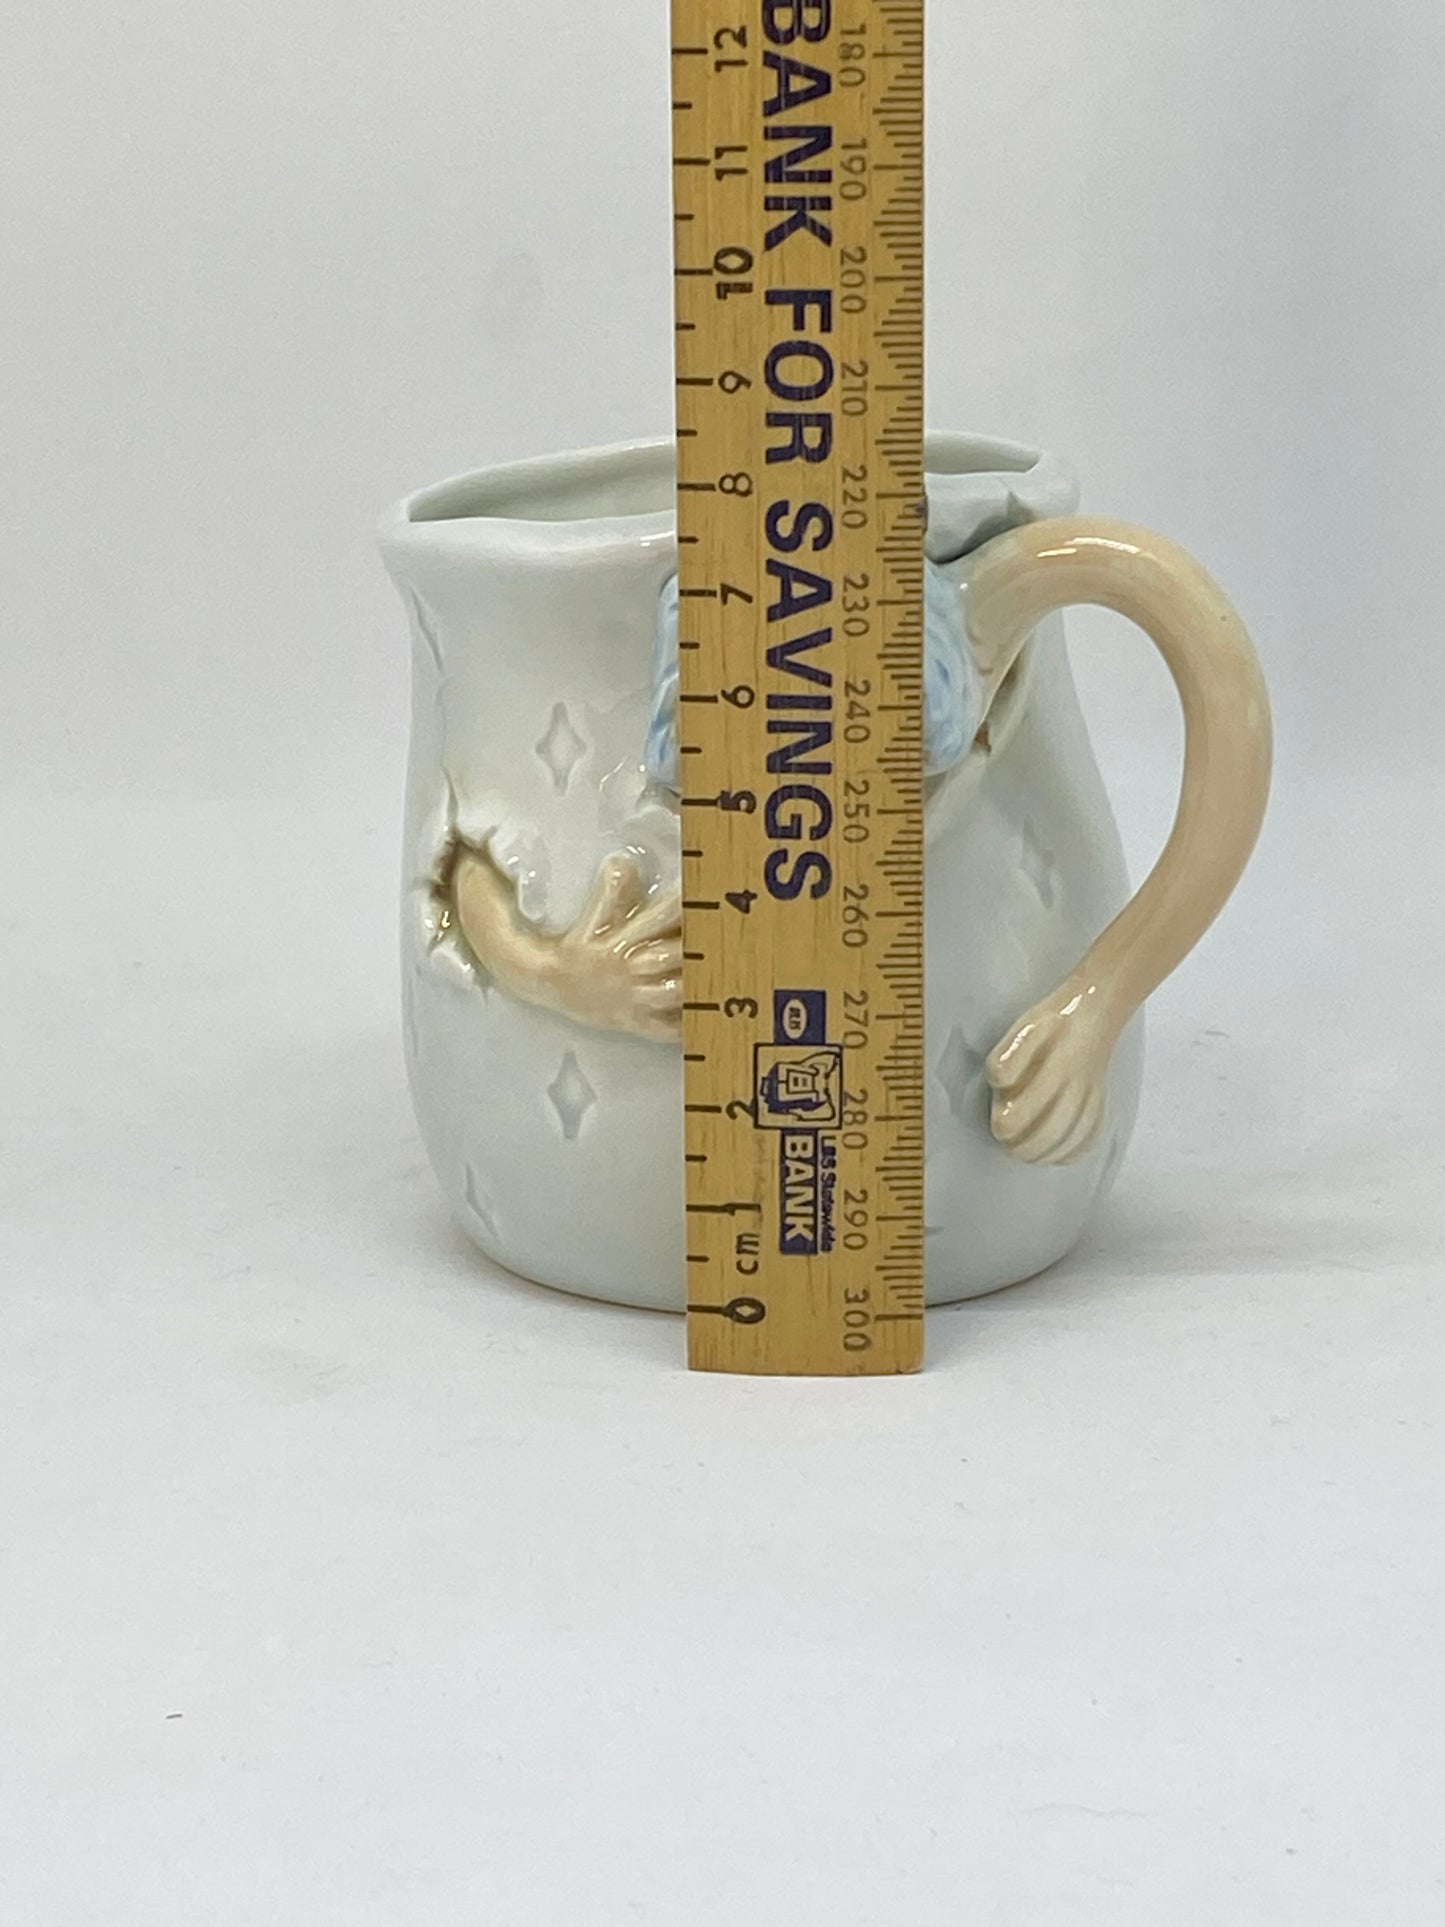 Marks and Rosenthal collectable cup - Man with bow tie escaping the cup